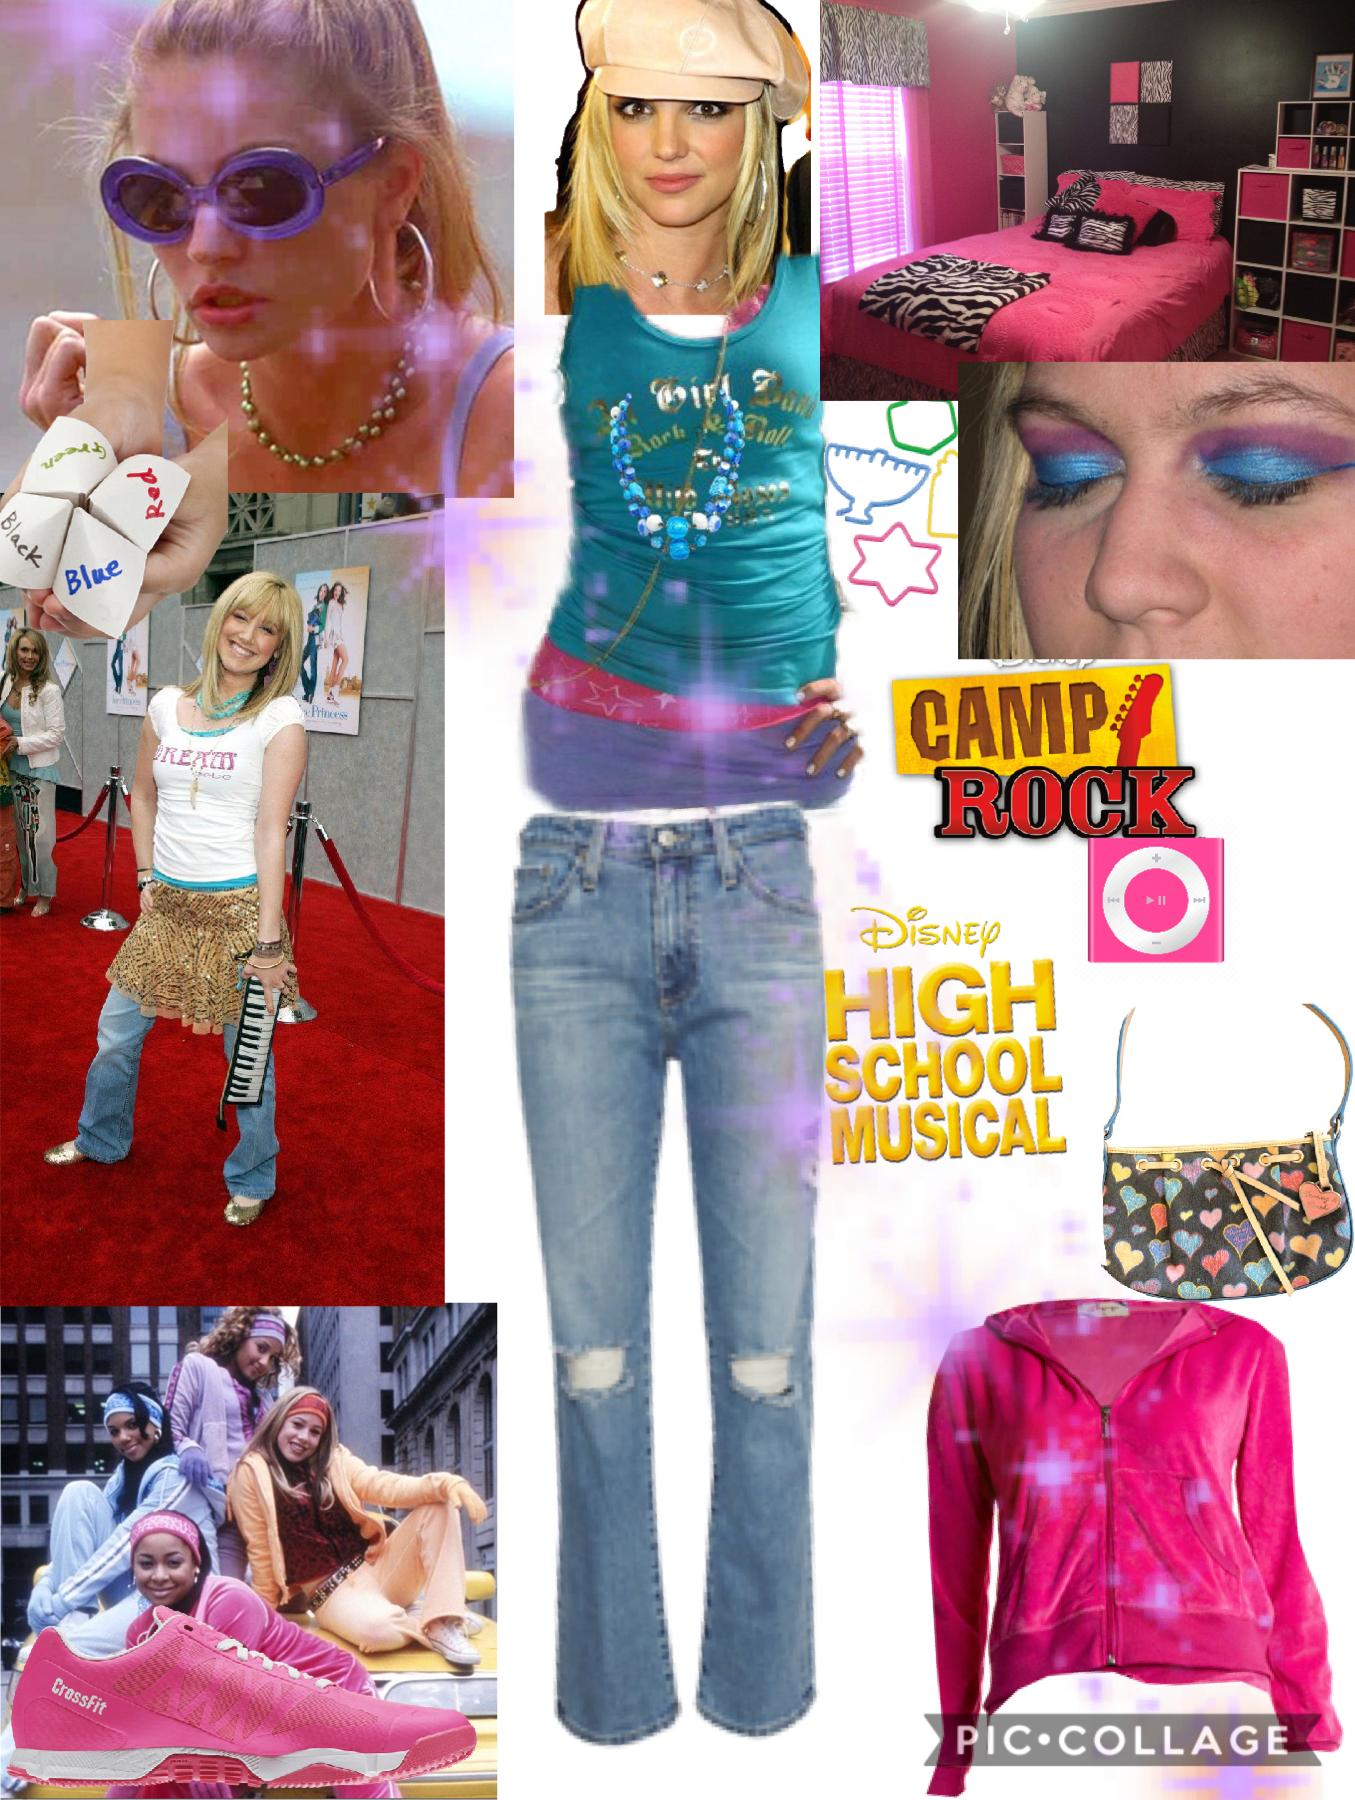 oof the 2000s style 

#style. #2000s #disney #pink #HSM #camp rock #piccollage #collage #oldstyle #trends #the2000sstyle